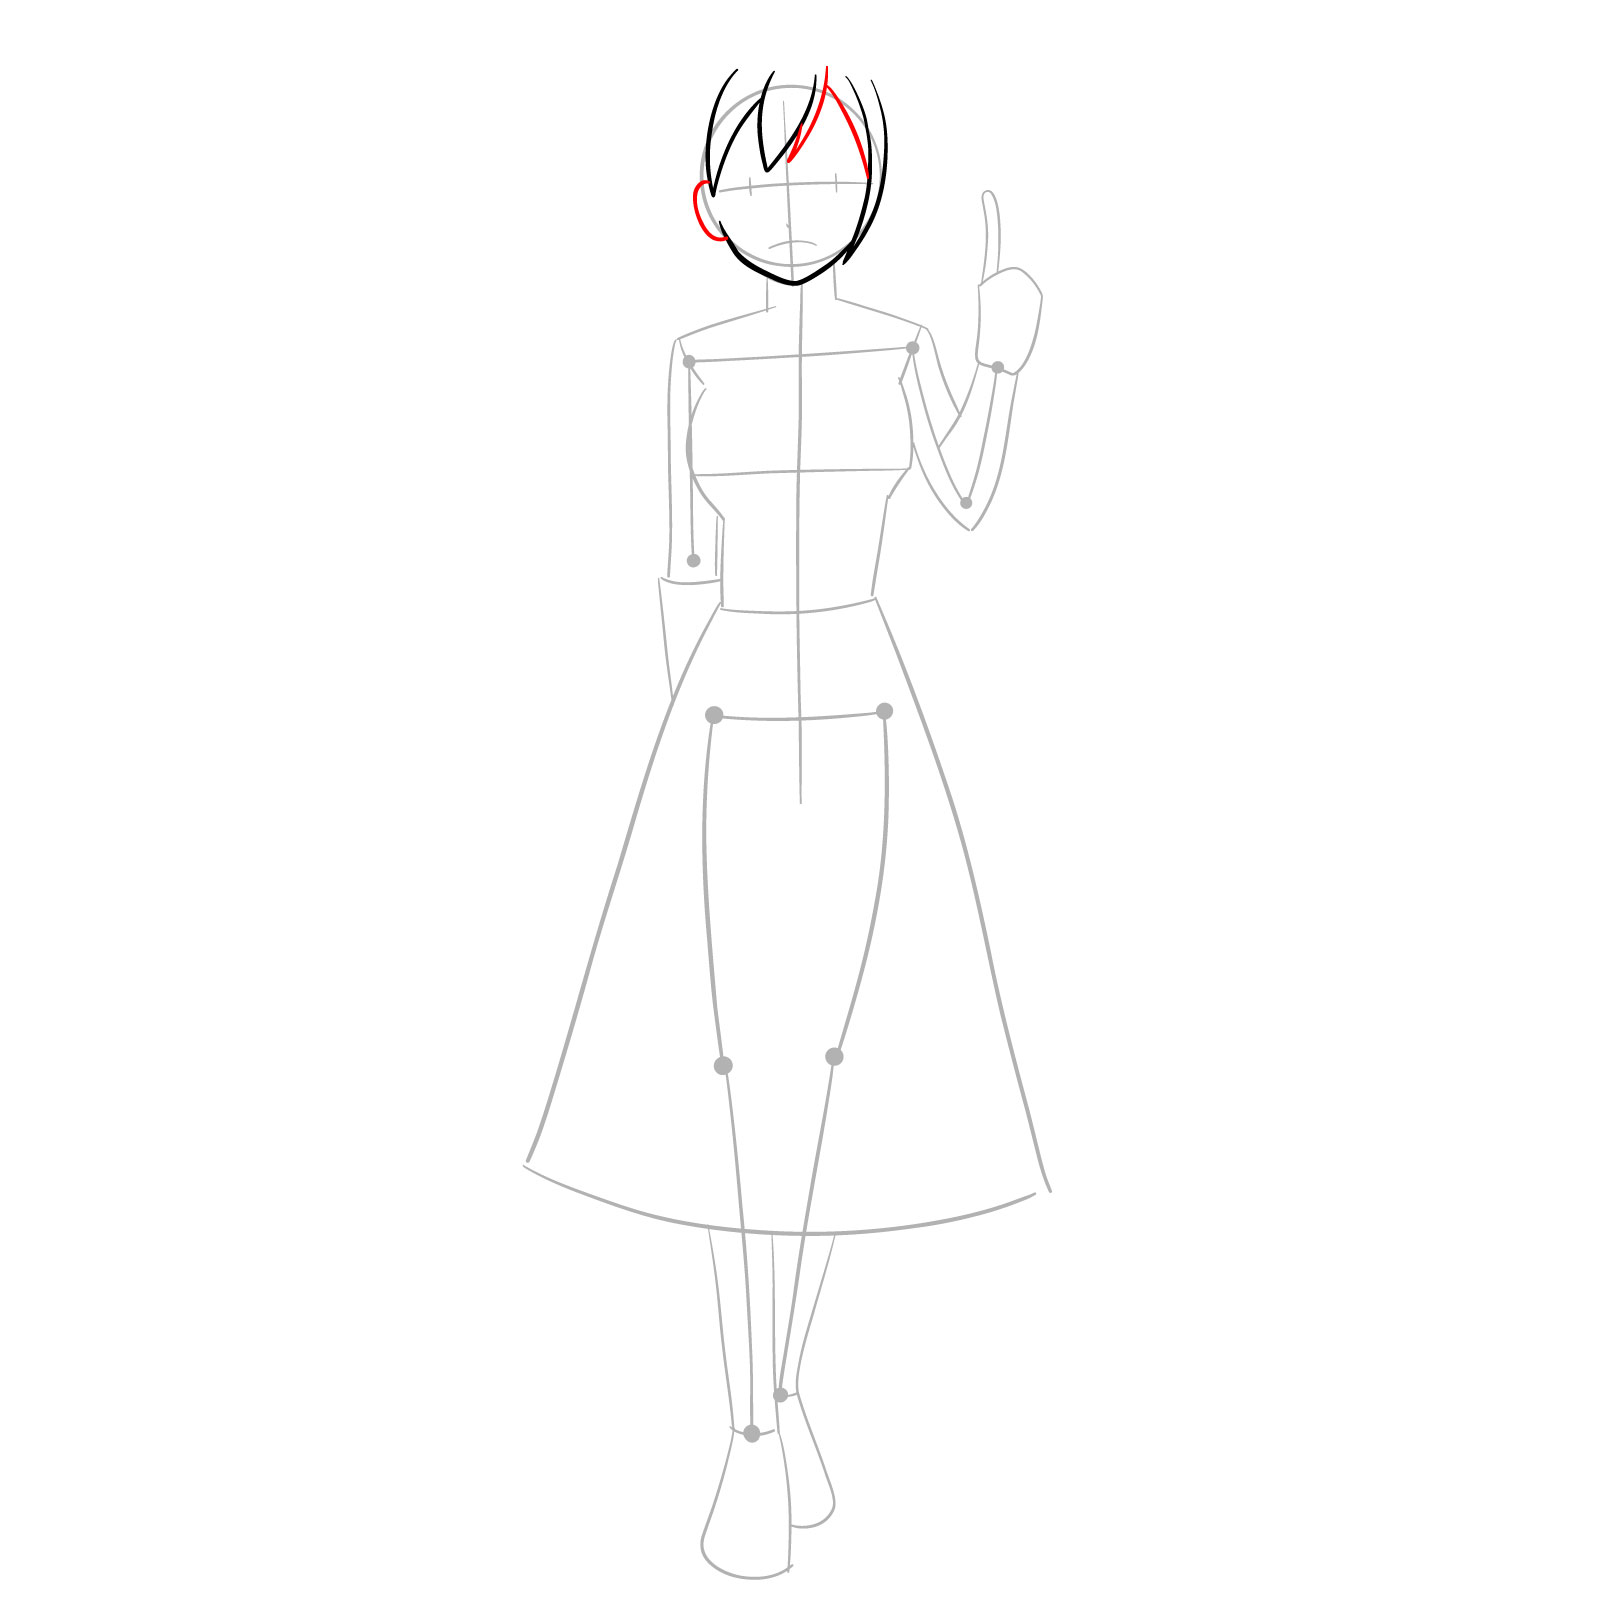 How to draw Lisanna Strauss from Fairy Tail - step 06